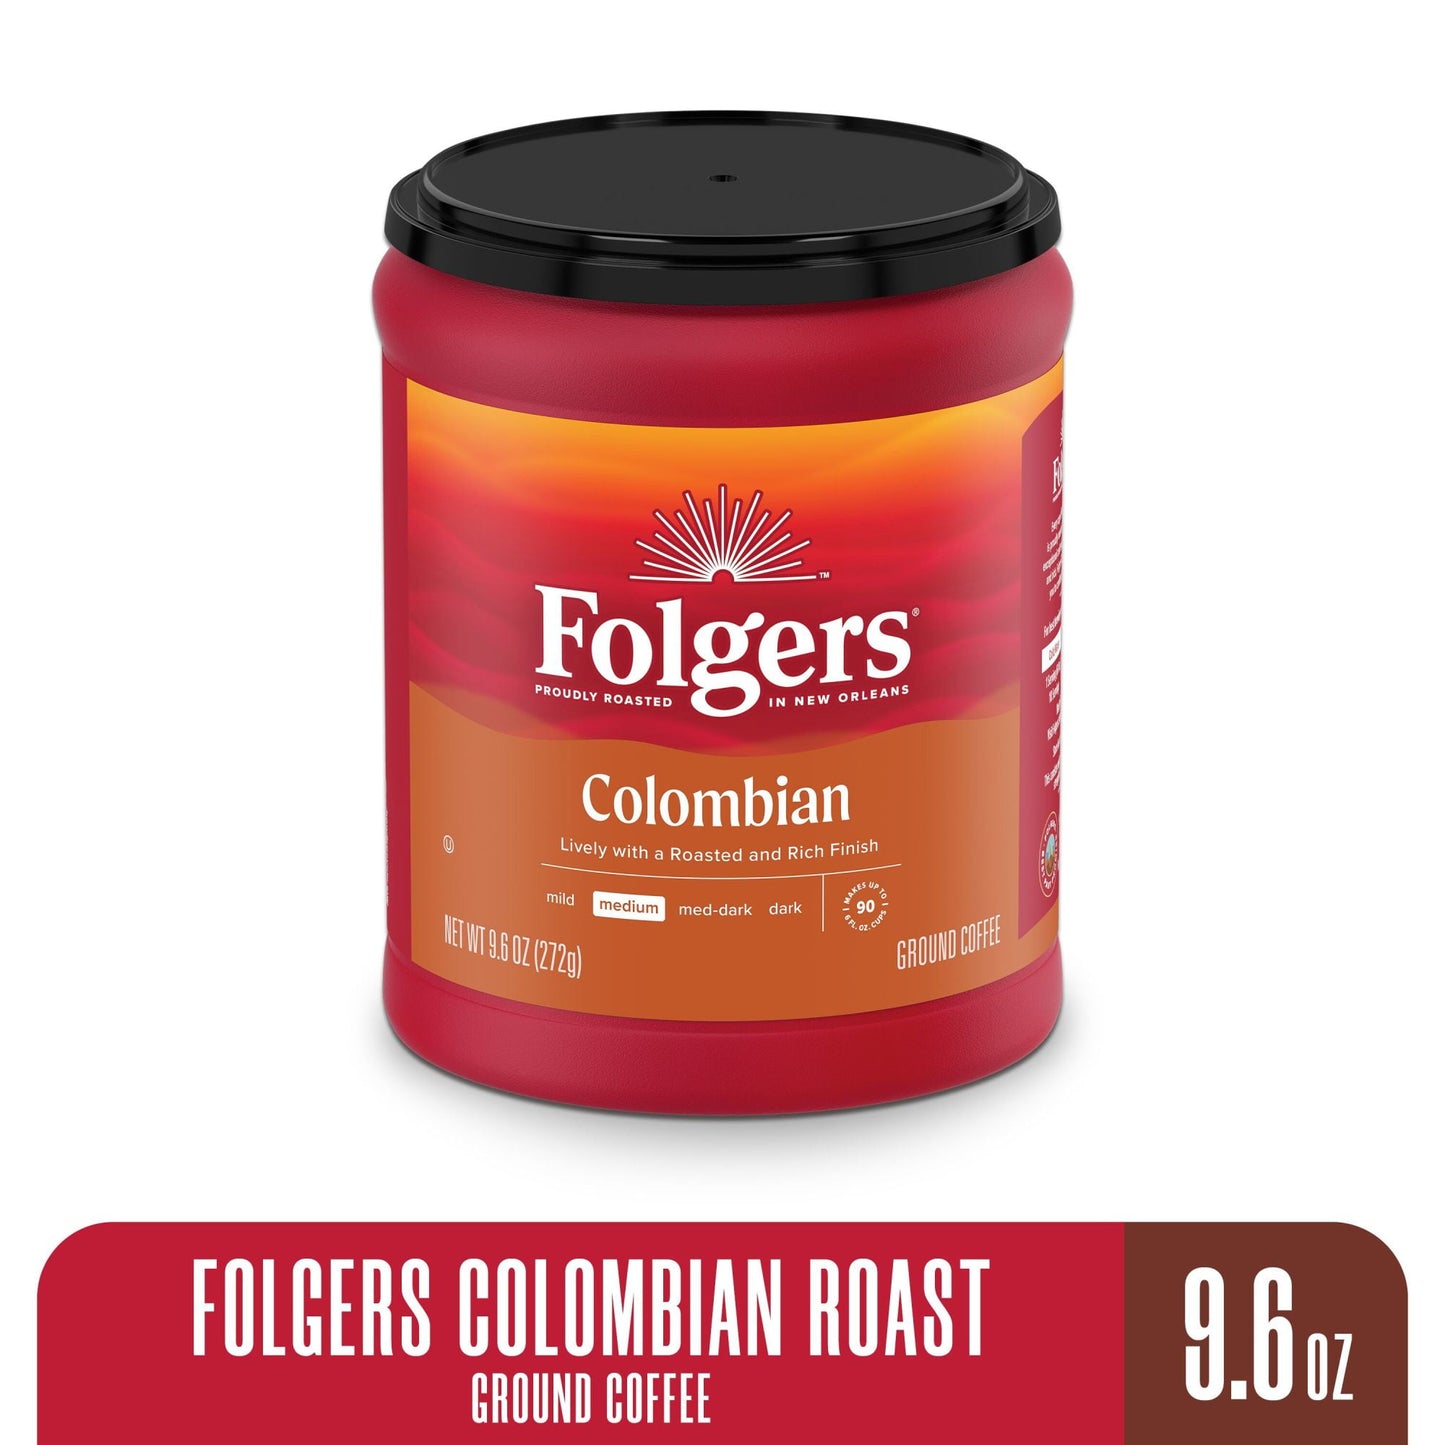 Folgers Colombian Coffee, Medium Roast Ground Coffee, 9.6 Ounce Canister